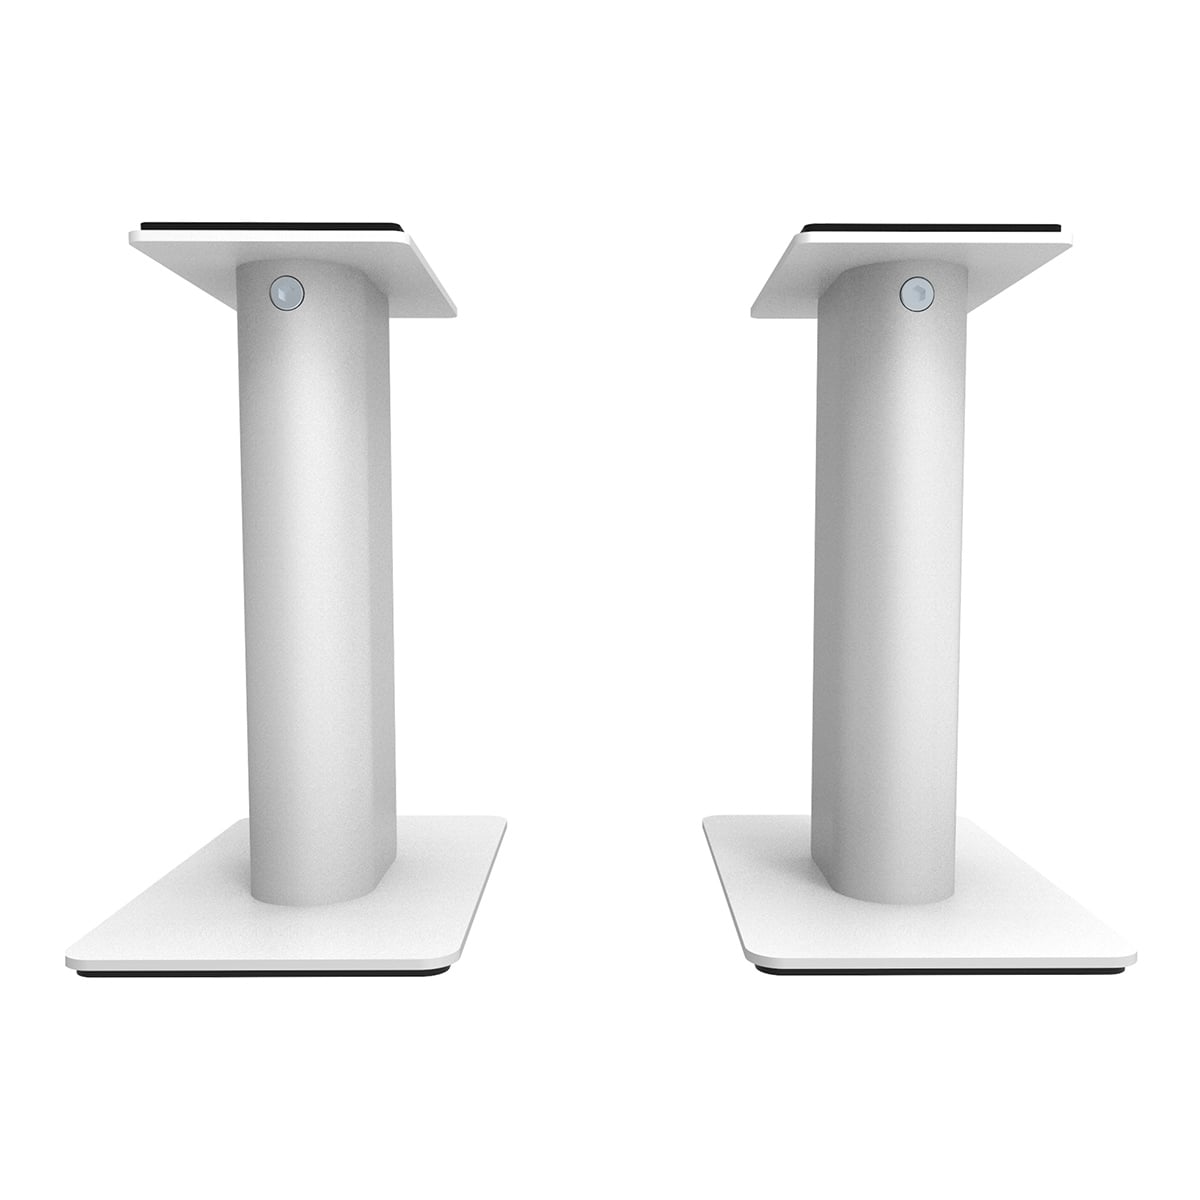 Kanto SP9 9" Universal Desktop Speaker Stands with Rotating Top Plates and Cable Management - Pair (White)